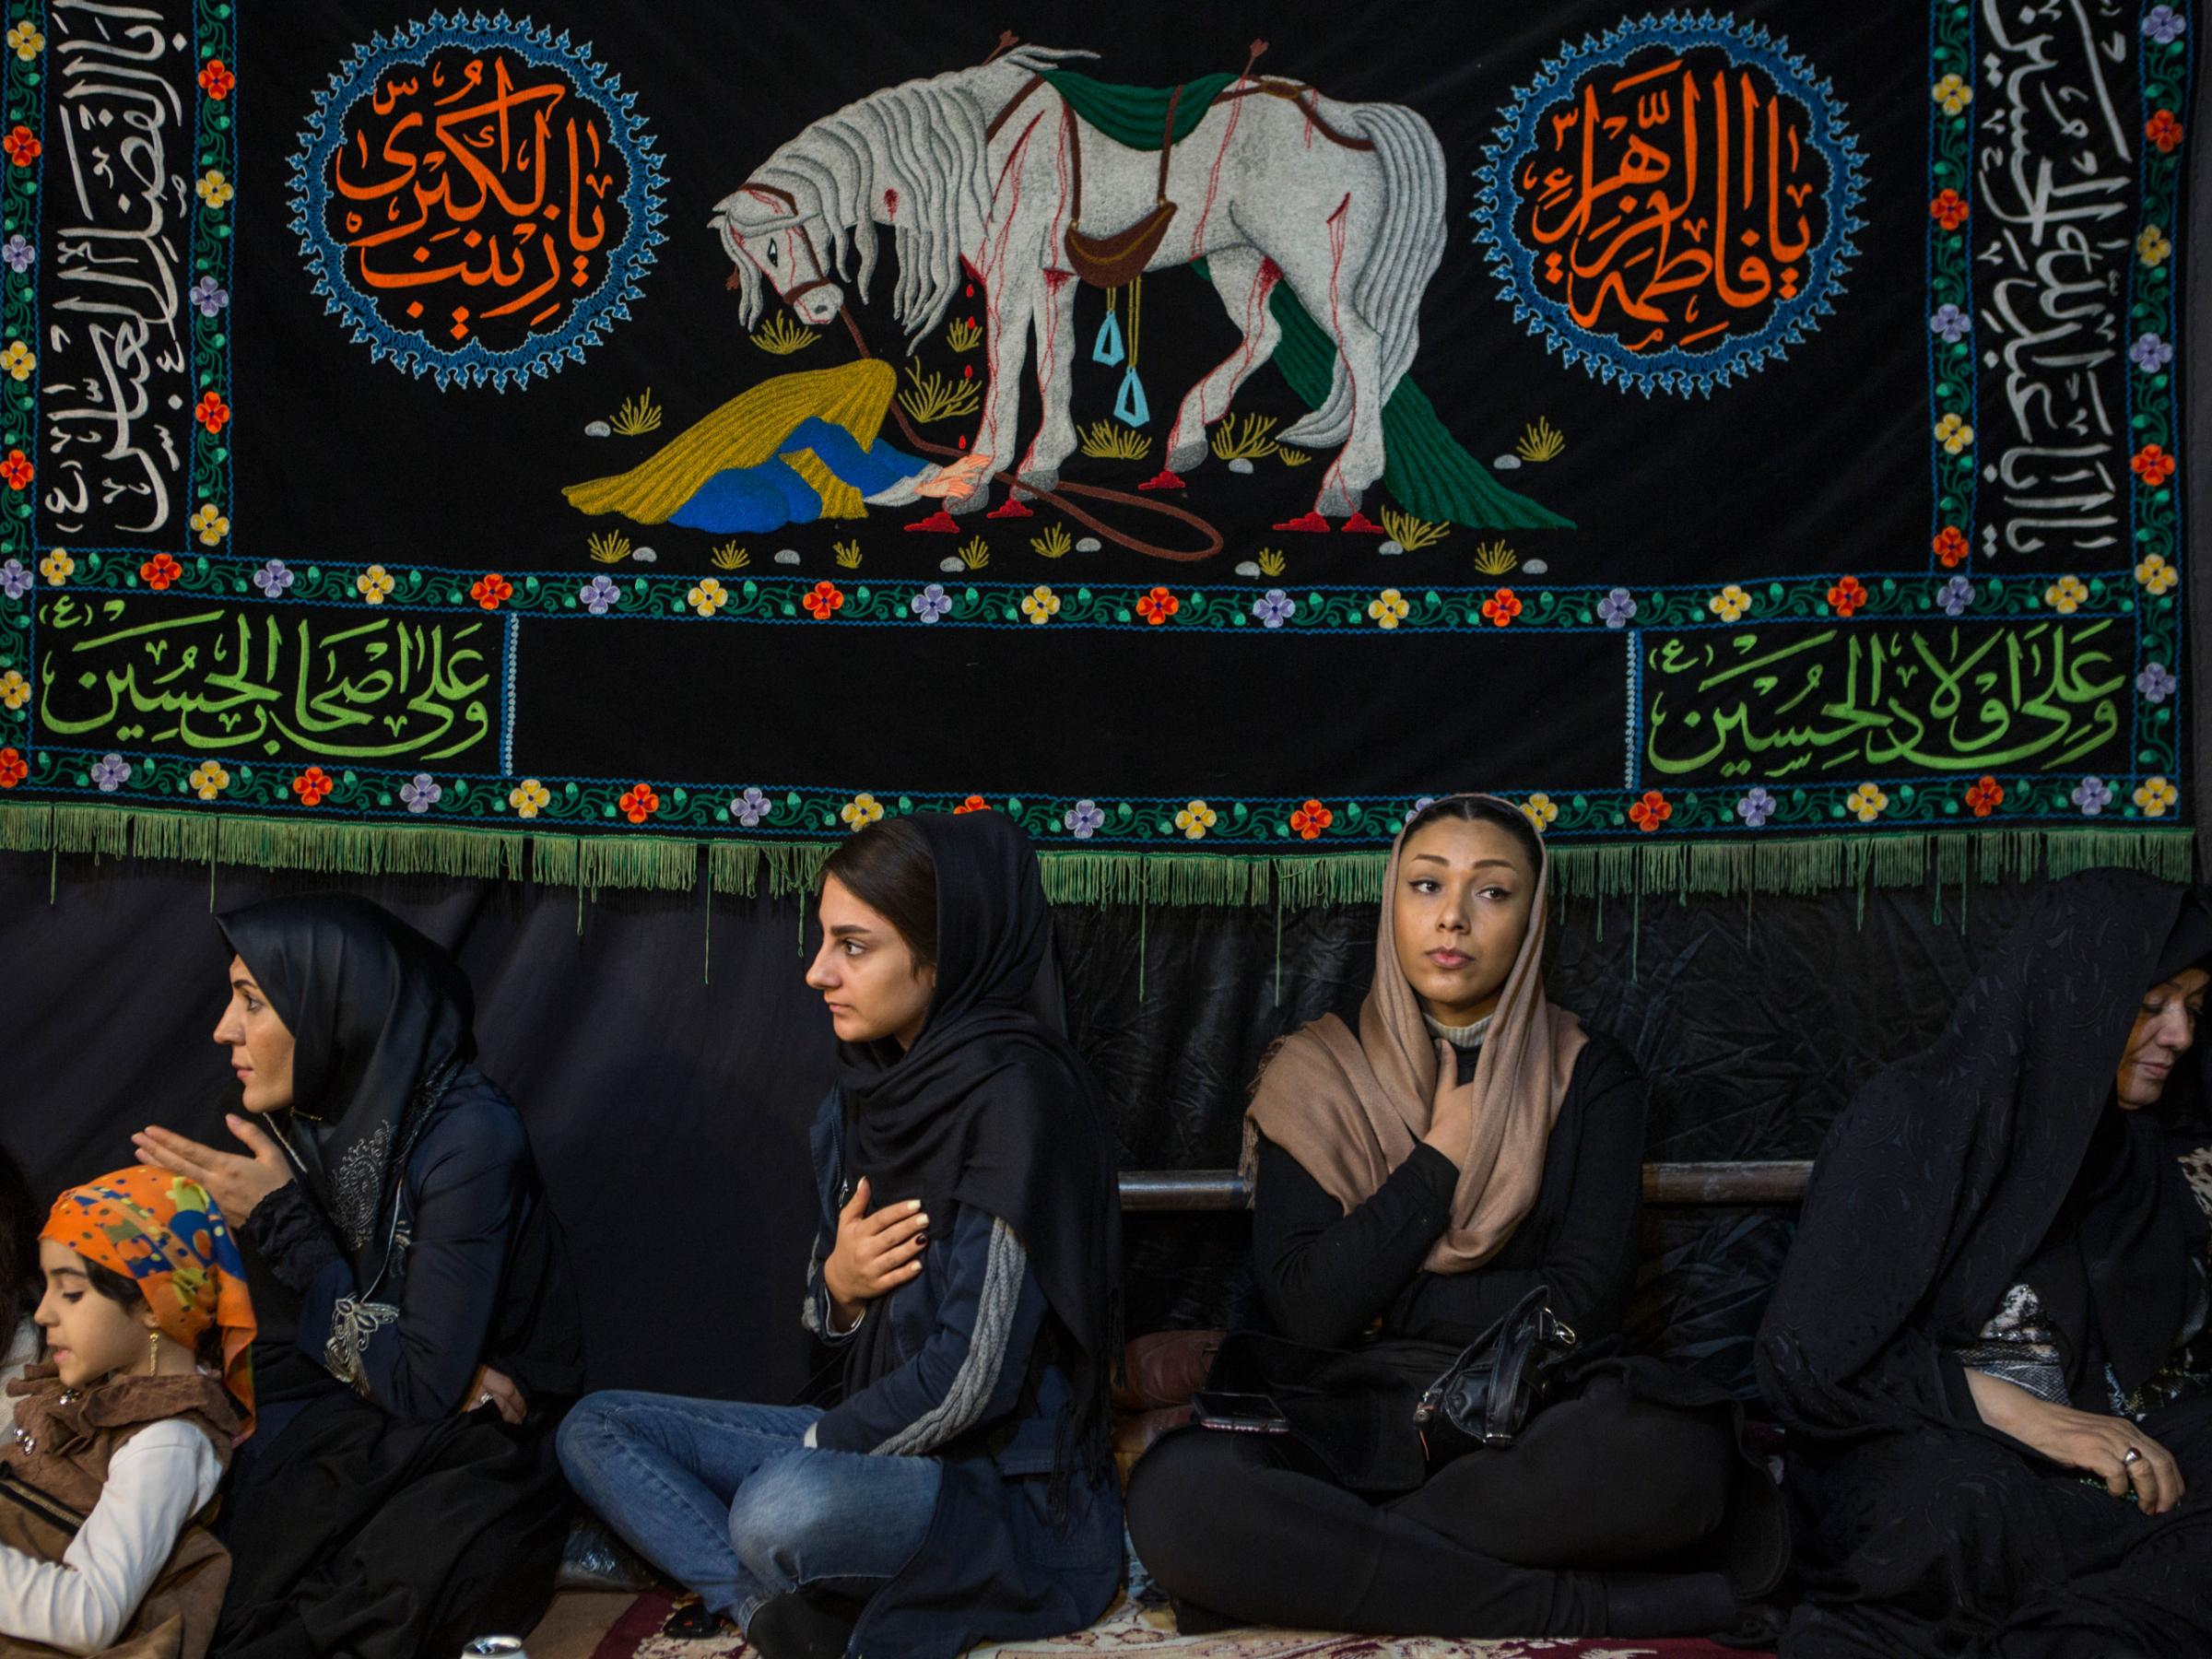 Iranian women beating their chests to commemorate the death of the 3rd and most revered Shiite Imam, Hossein, who people view as a saint here. During ten days of mourning his violent death on the plains of Kerbala in current day Iraq is remembered. Here the women have gathered at a makeshift tent in western Tehran, listening to a female religious chanter.